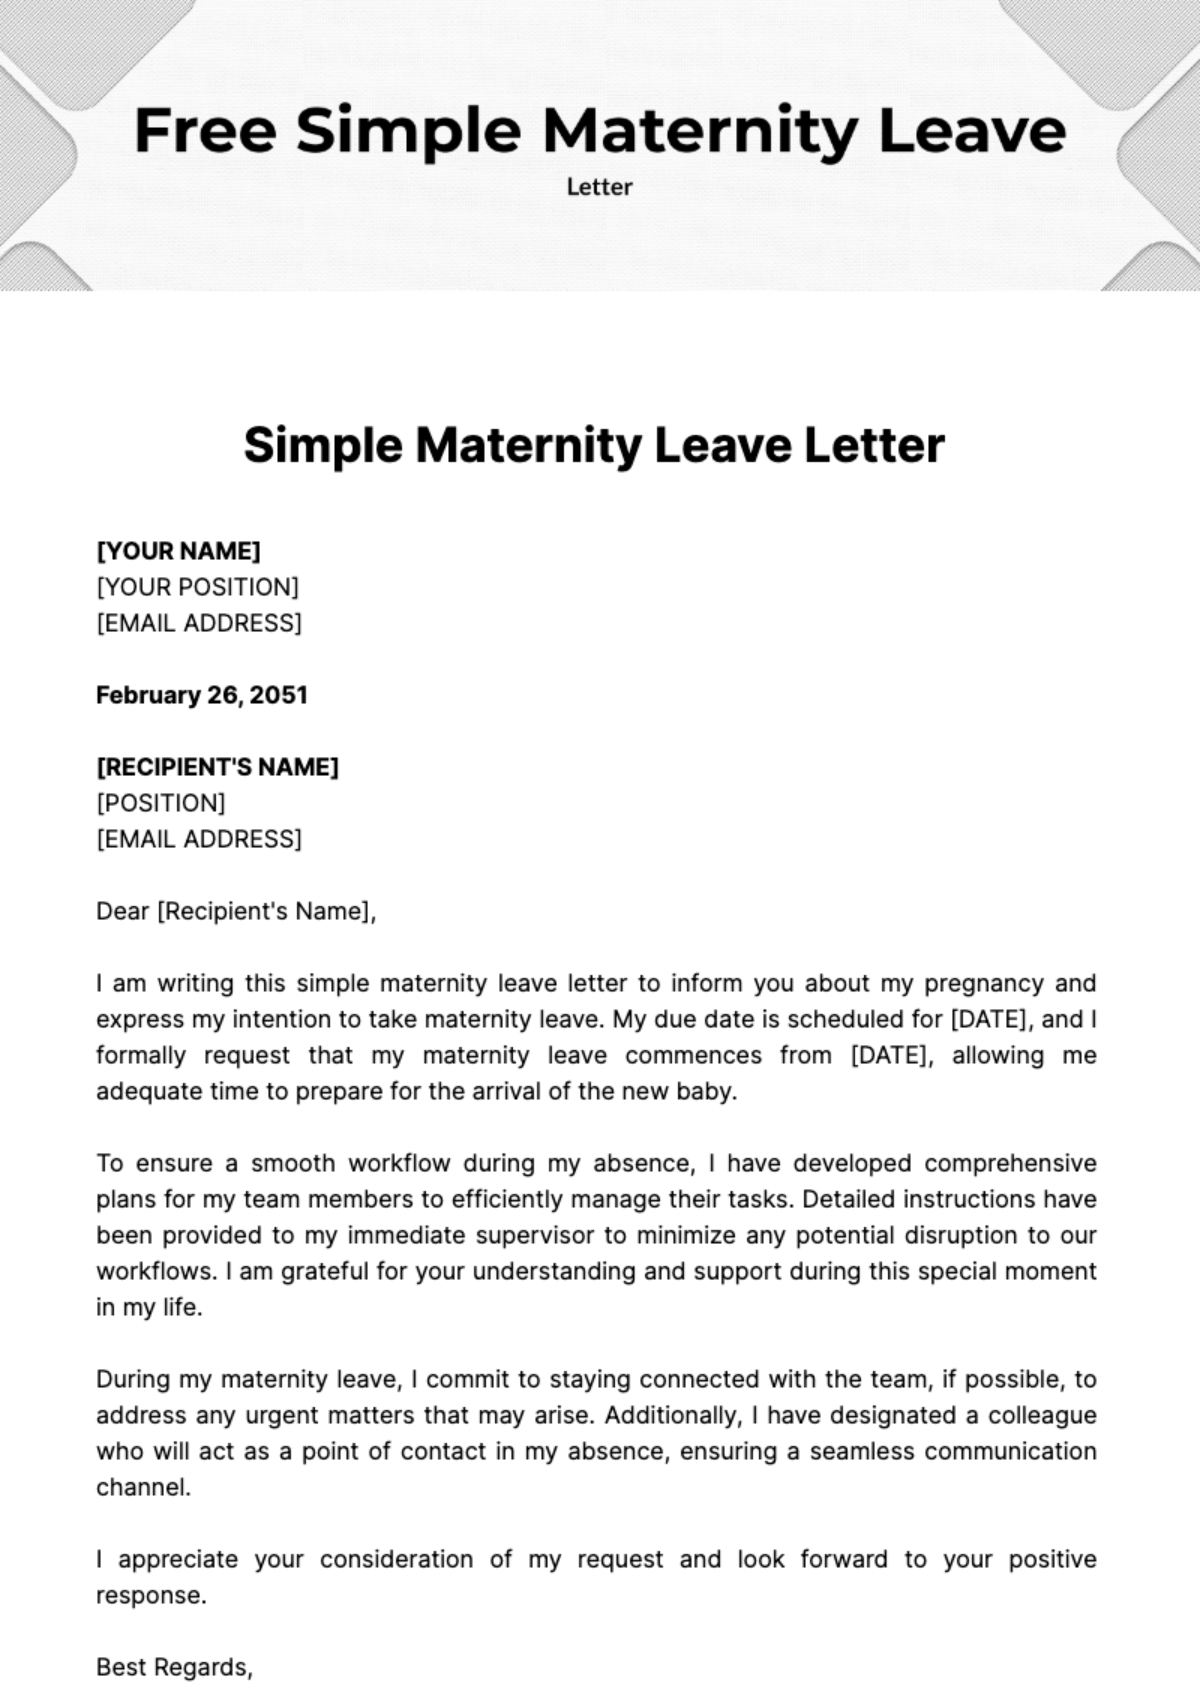 Free Simple Maternity Leave Letter Template